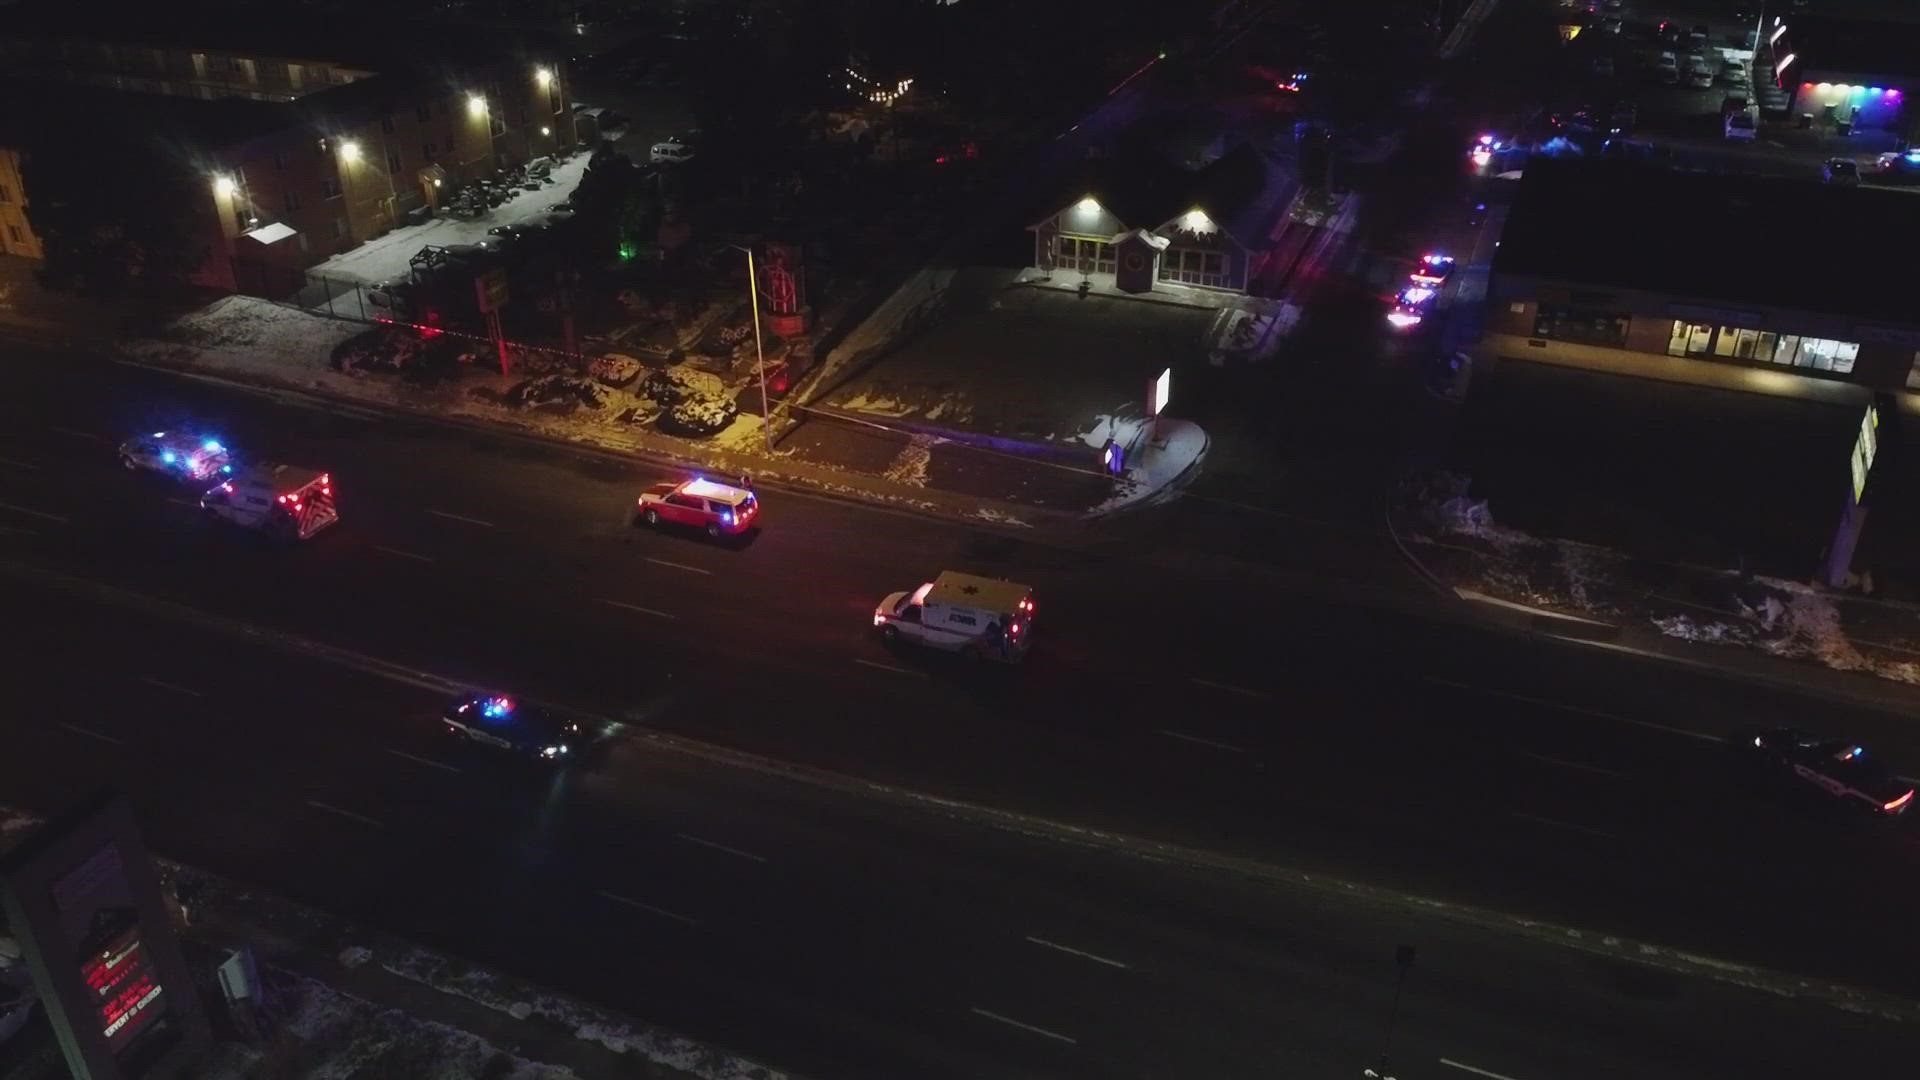 Five people are dead and multiple others are injured after a shooting at a Colorado Springs nightclub, according to police. Suspect is in custody.